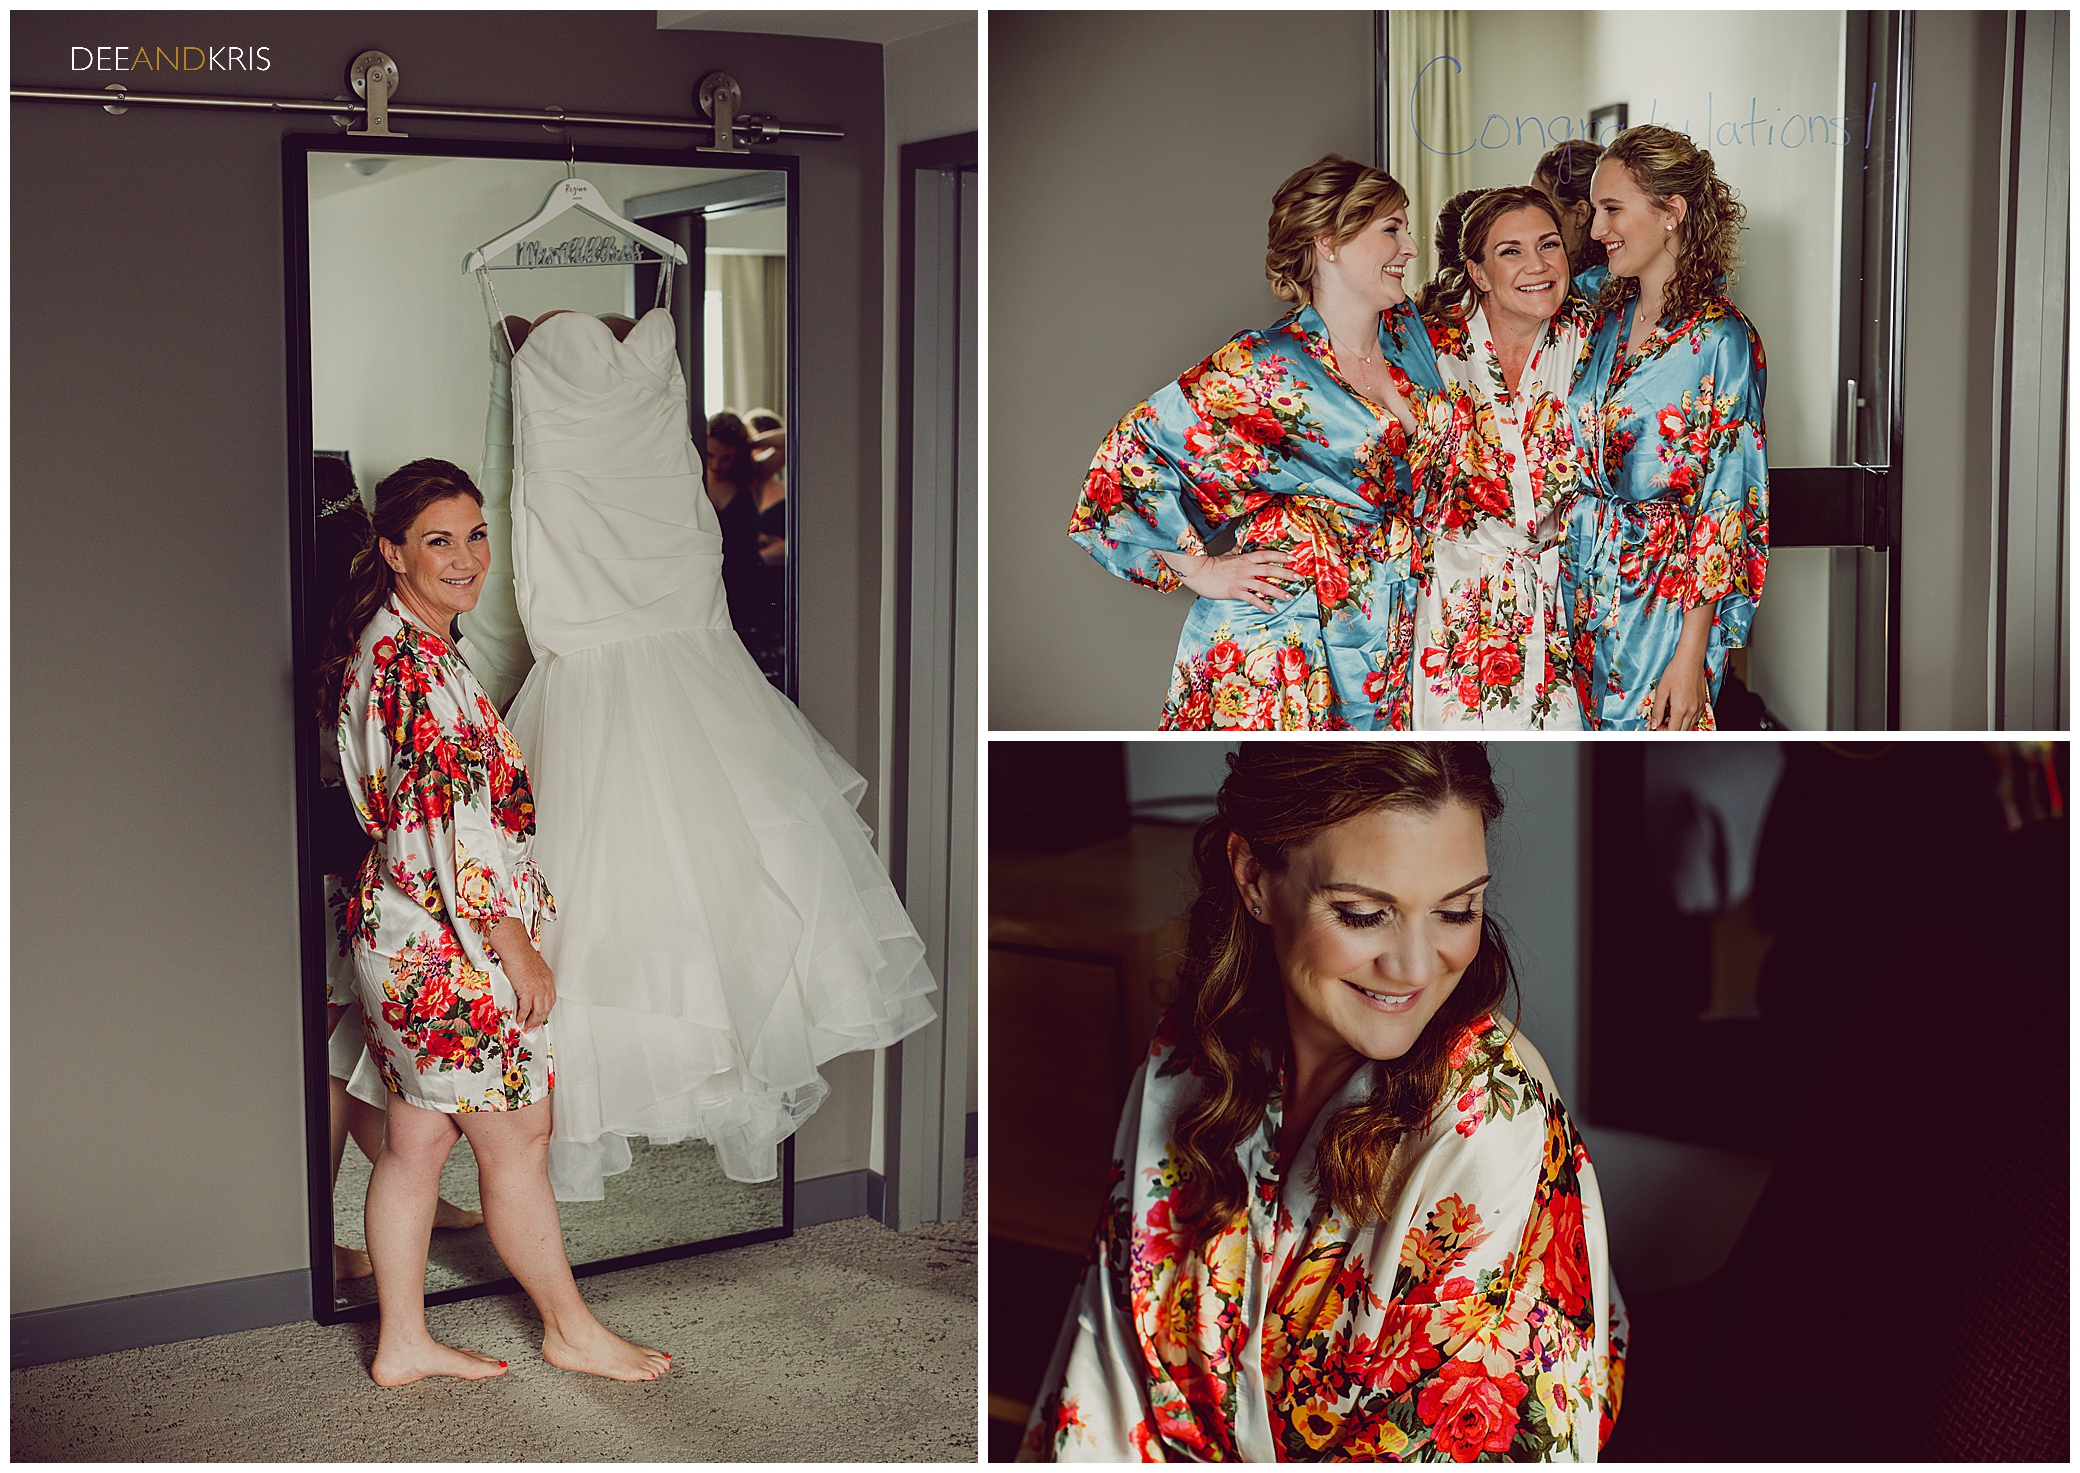 Dee and Kris photography photograph bride and bridesmaids getting ready for wedding day at Kimpton Sawyer